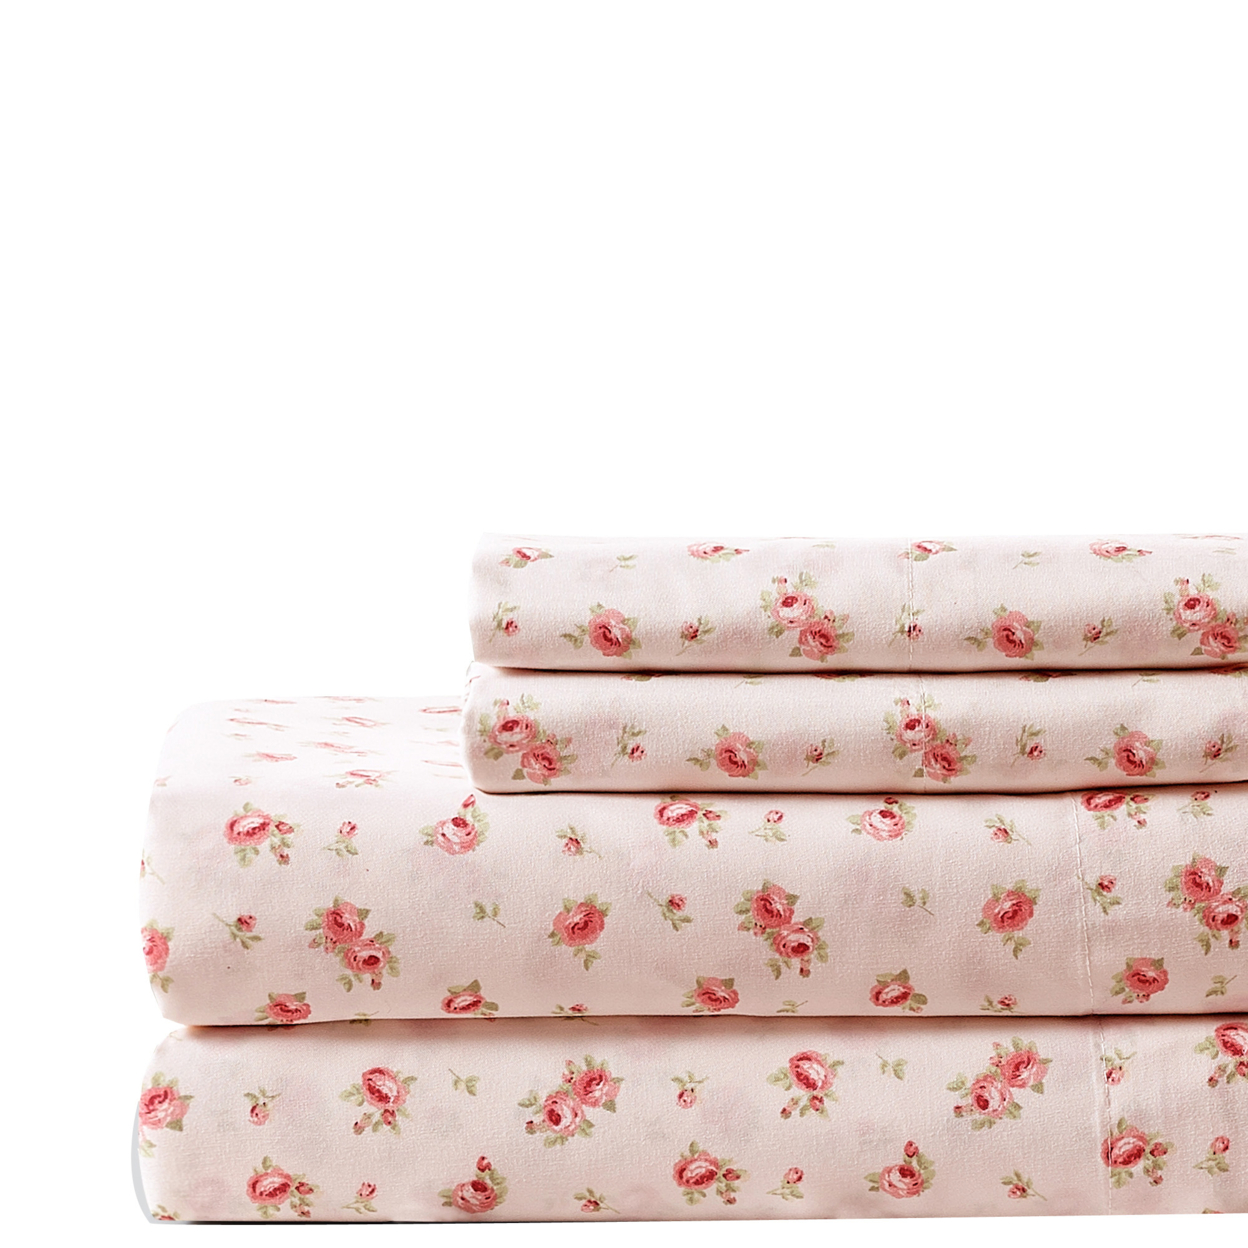 Melun 4 Piece Full Size Sheet Set With Rose Sketch The Urban Port, Pink And White- Saltoro Sherpi